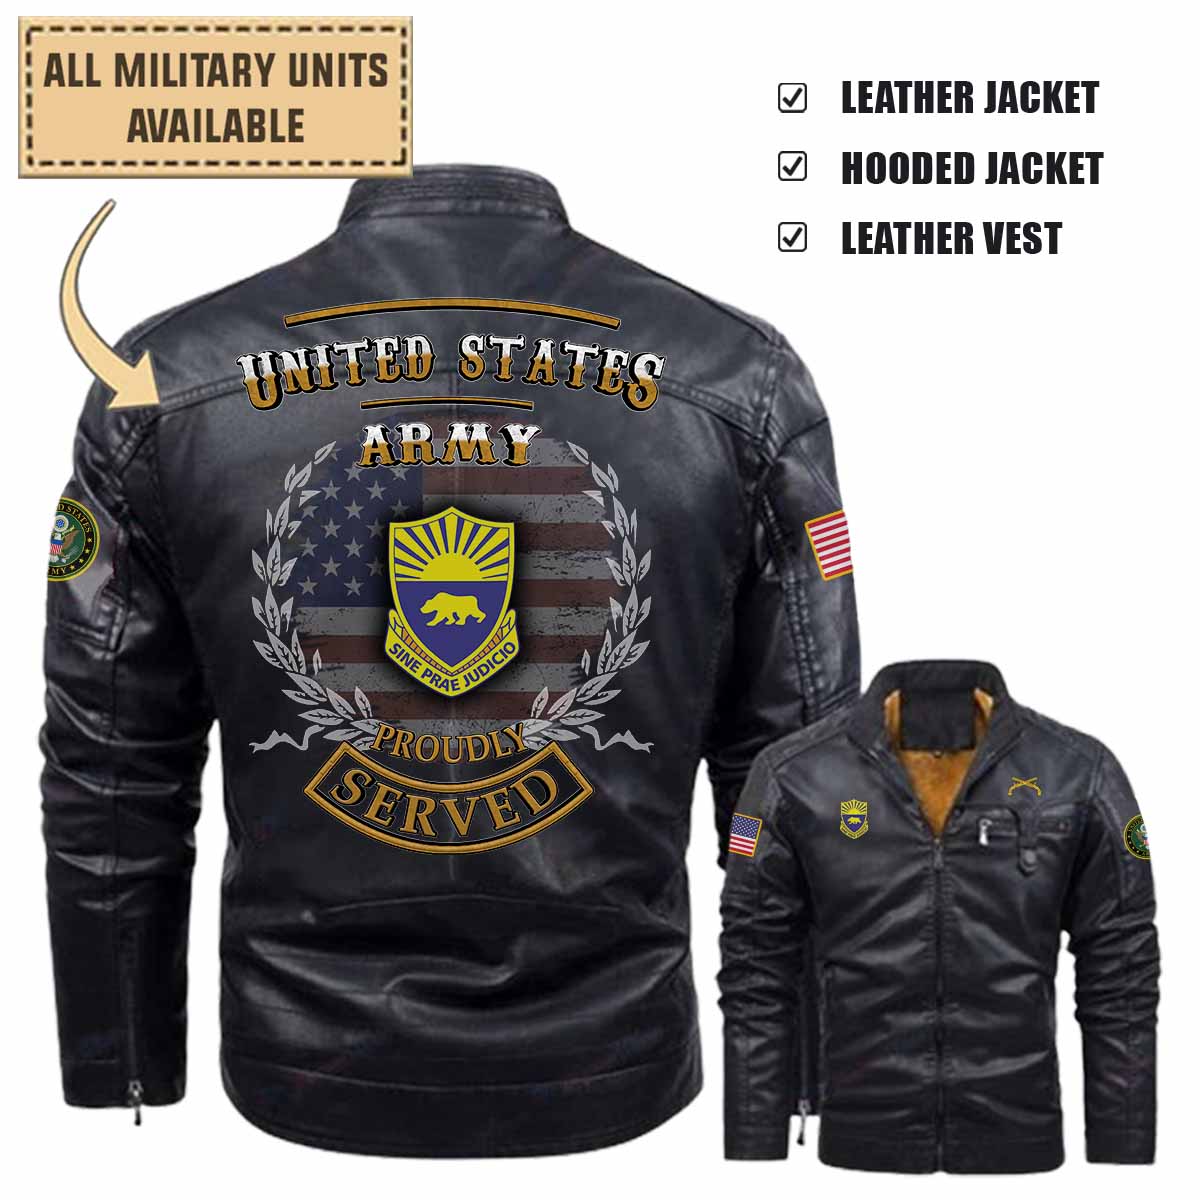 508th MP BN 508th Military Police Battalion_Military Leather Jacket and Vest